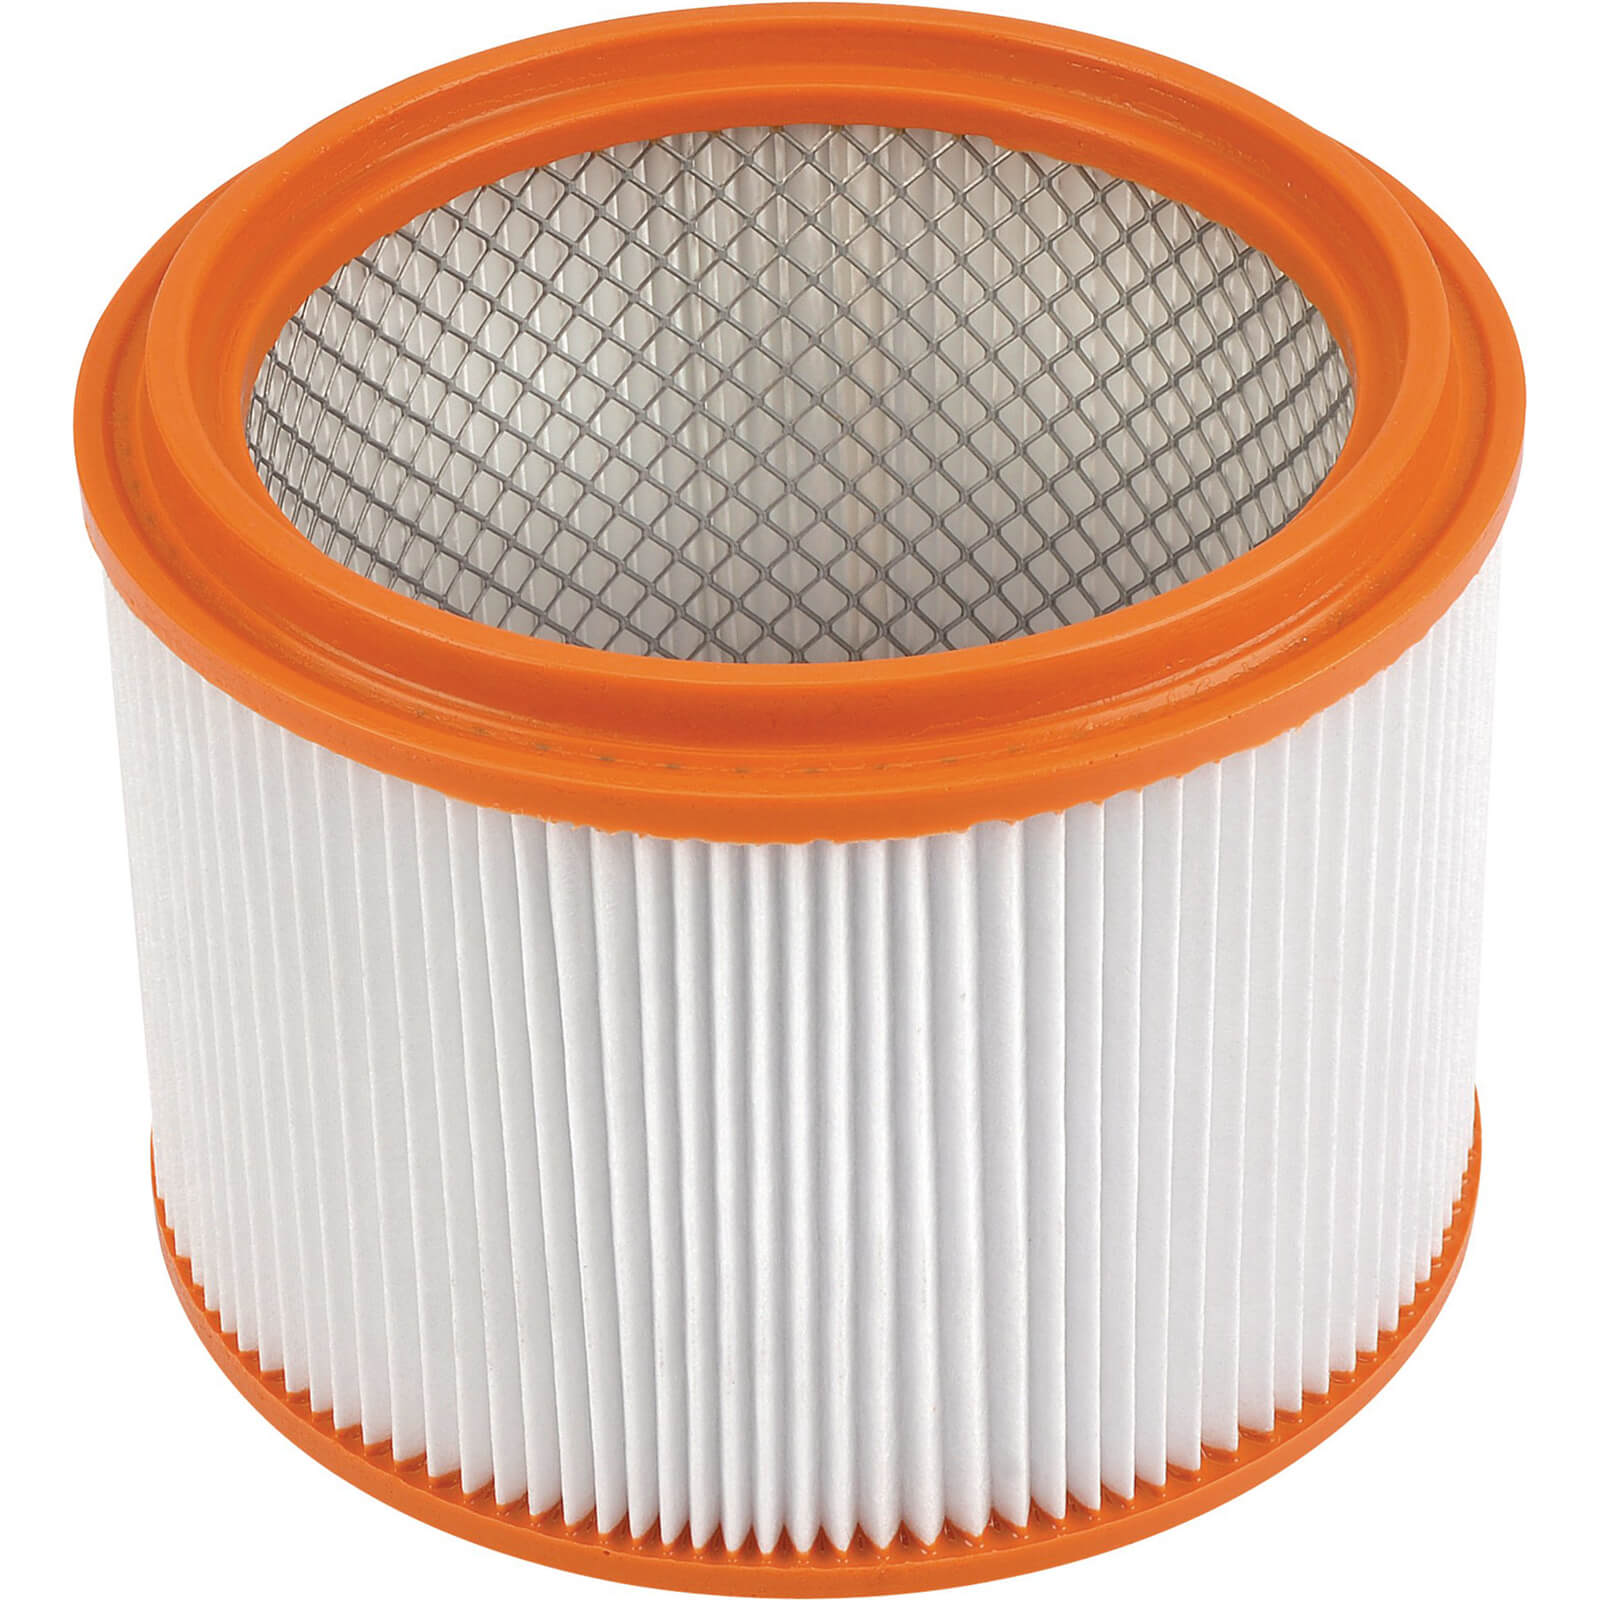 Image of Draper HEPA Cartridge Filter for SWD1100A